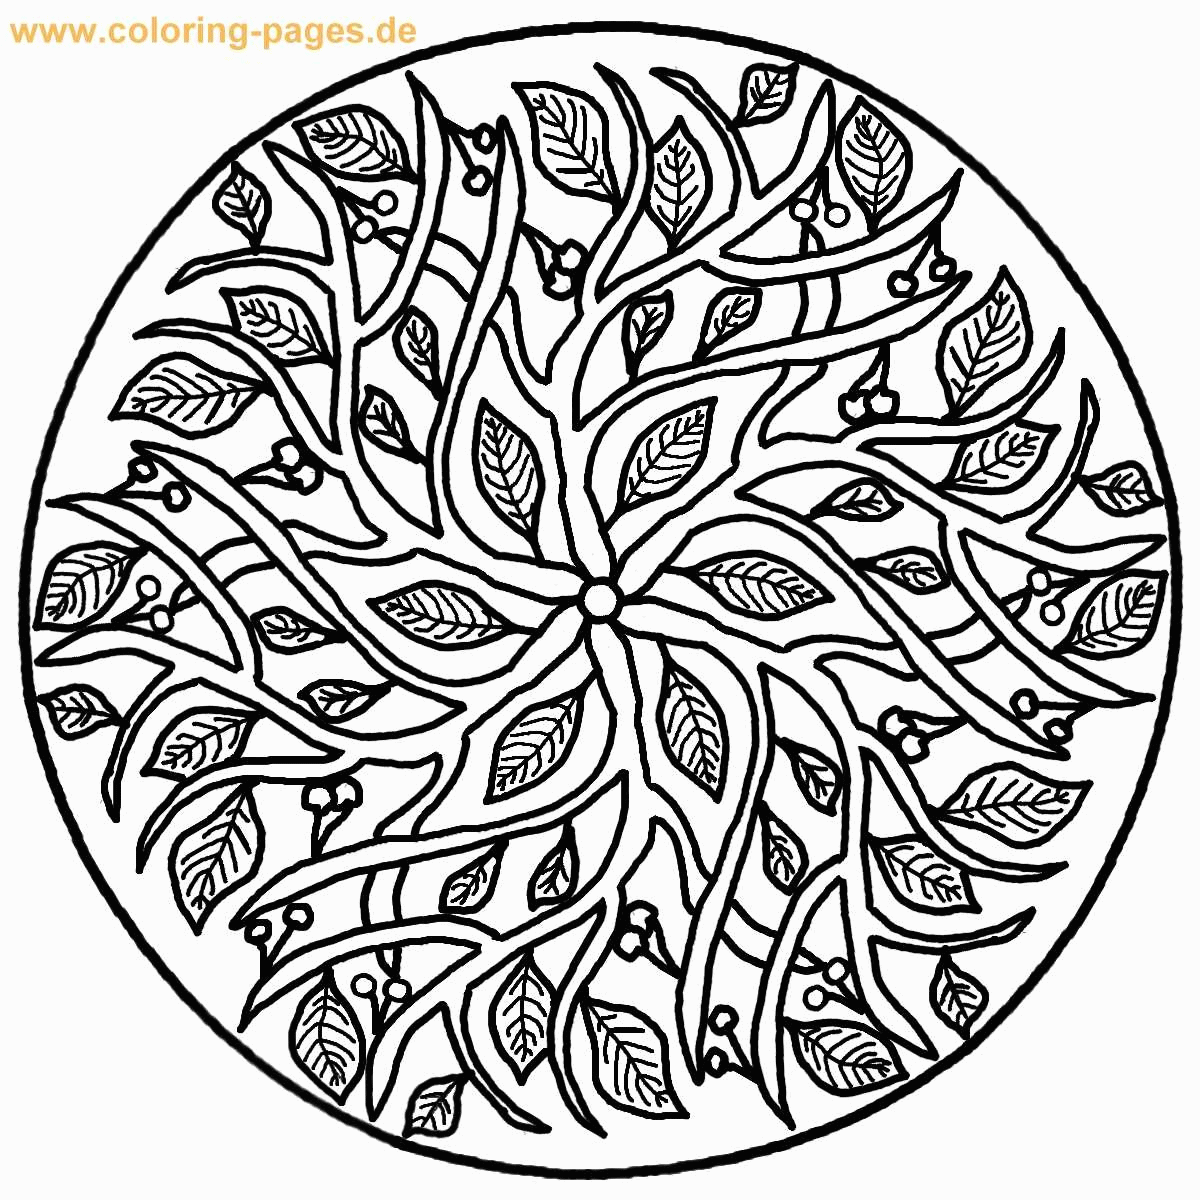 Related Abstract Coloring Pages item-11357, Abstract Coloring ...